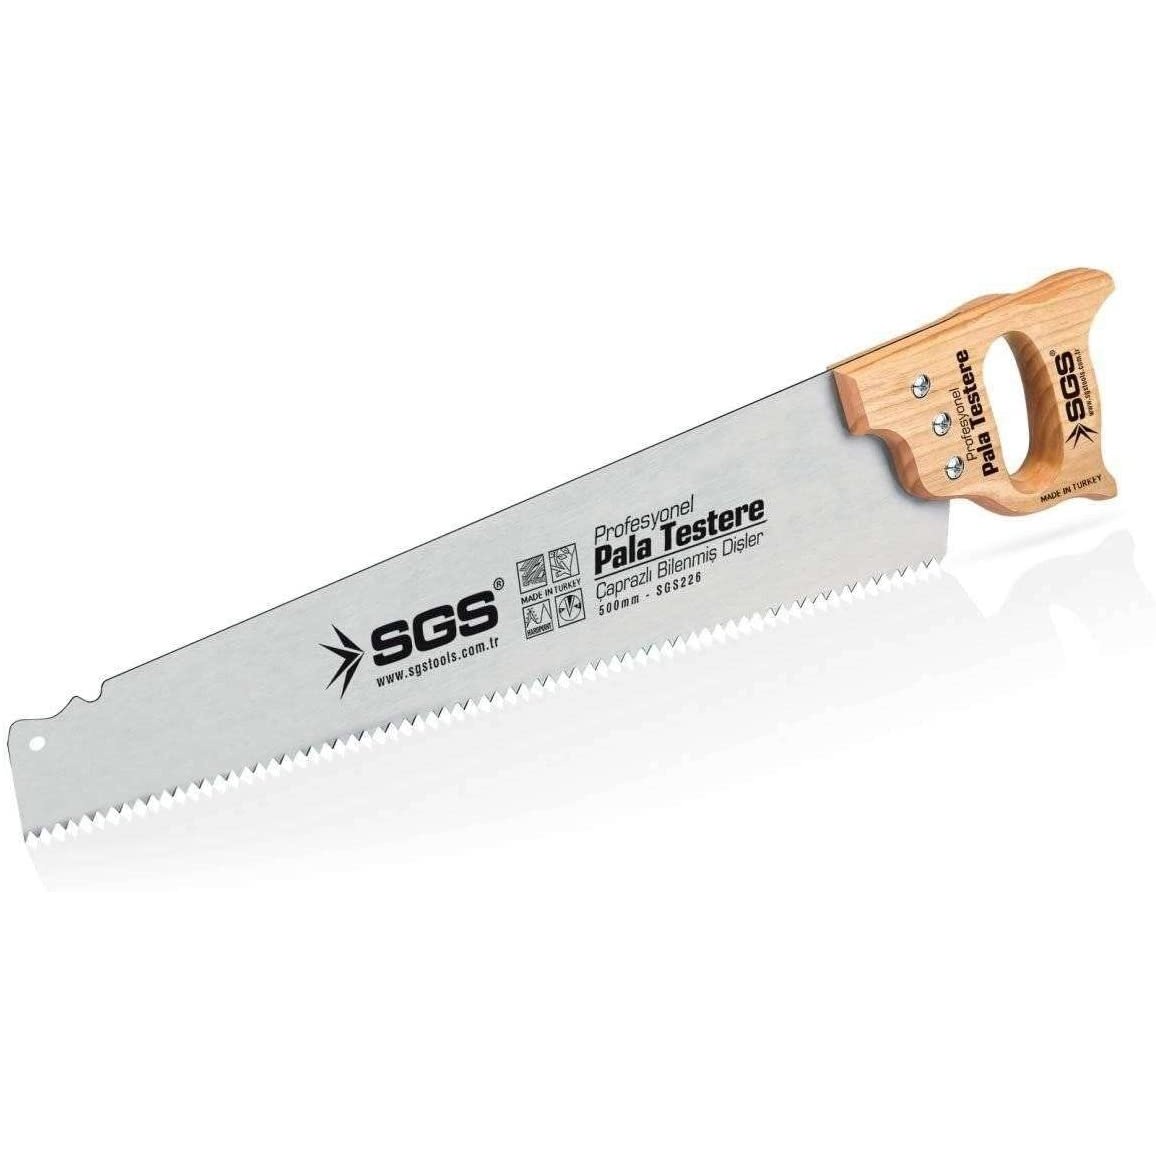 SGS Hand Saw with Wooden Handle - 12" & 20" | Supply Master | Accra, Ghana Hand Saws & Cutting Tools Buy Tools hardware Building materials